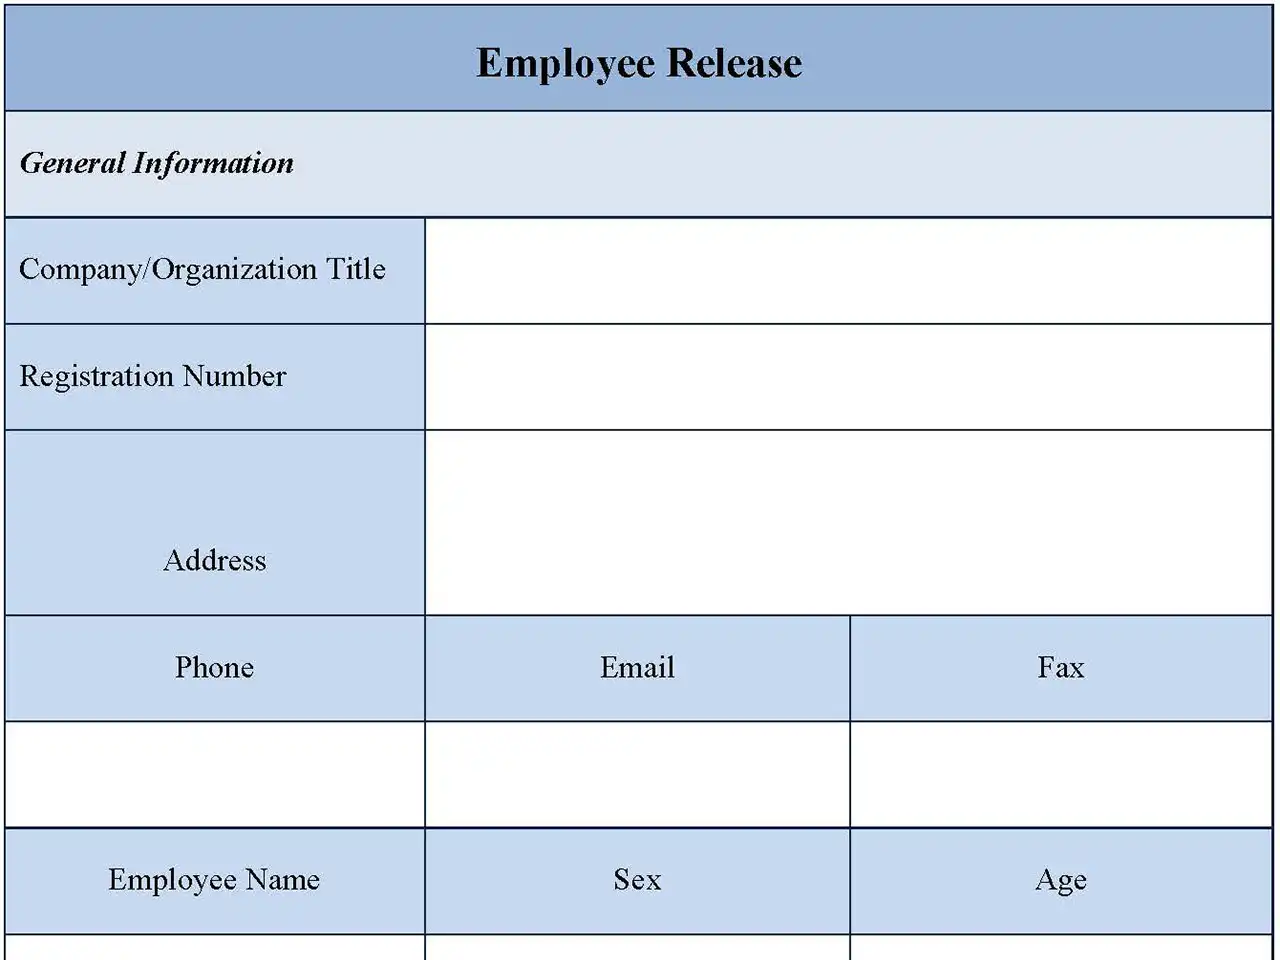 Employee Release Fillable PDF Form And Word Document